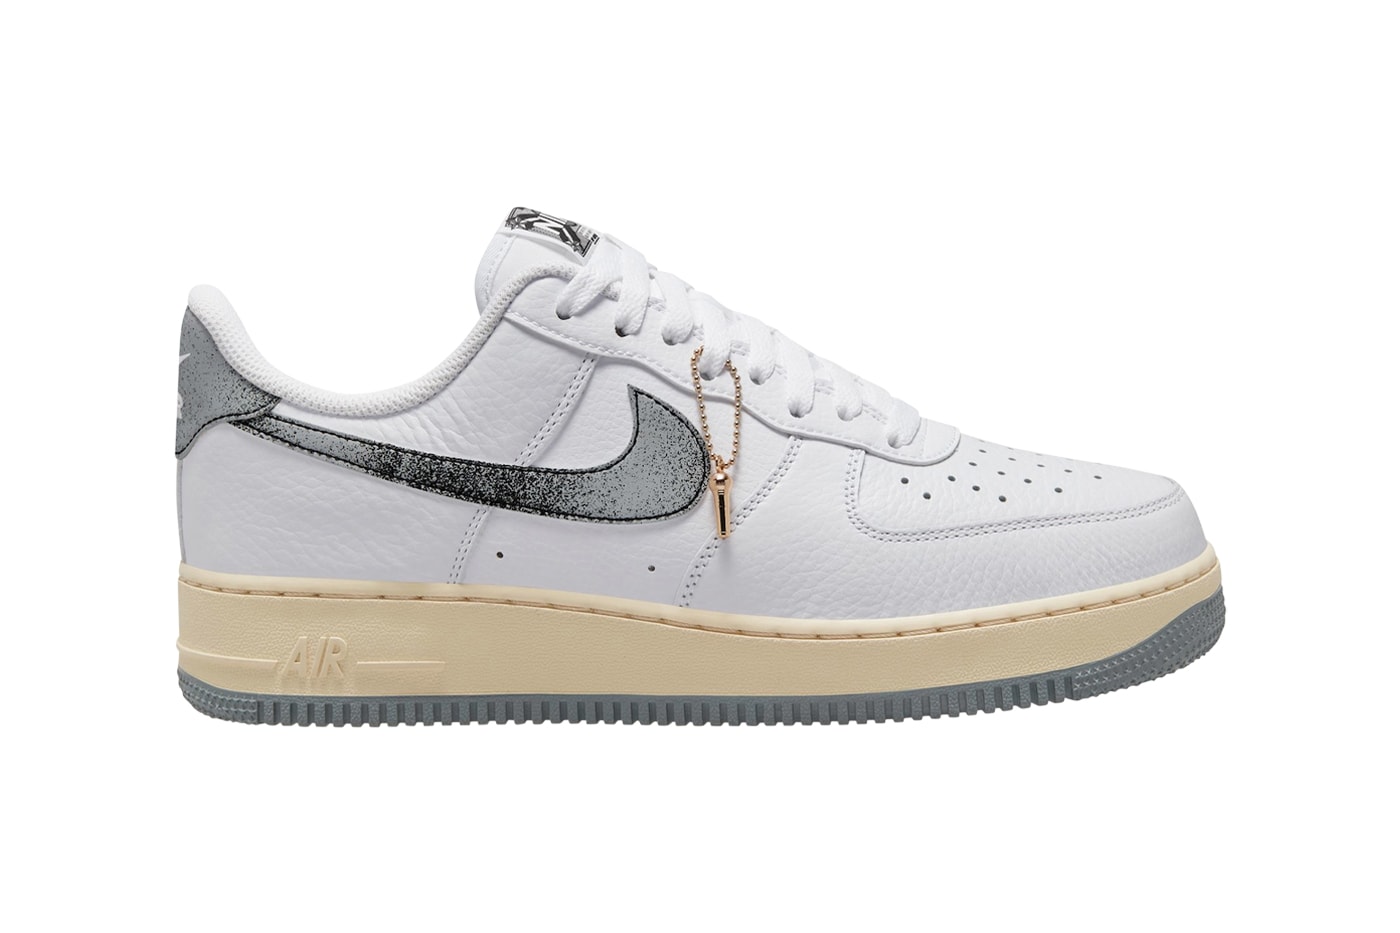 Nike Air Force 1 Low Blazer Mid white smoke grey gold Classics Pack parental advisory insoles cassette tape gold microphone hangtag records mixtapes release date info price